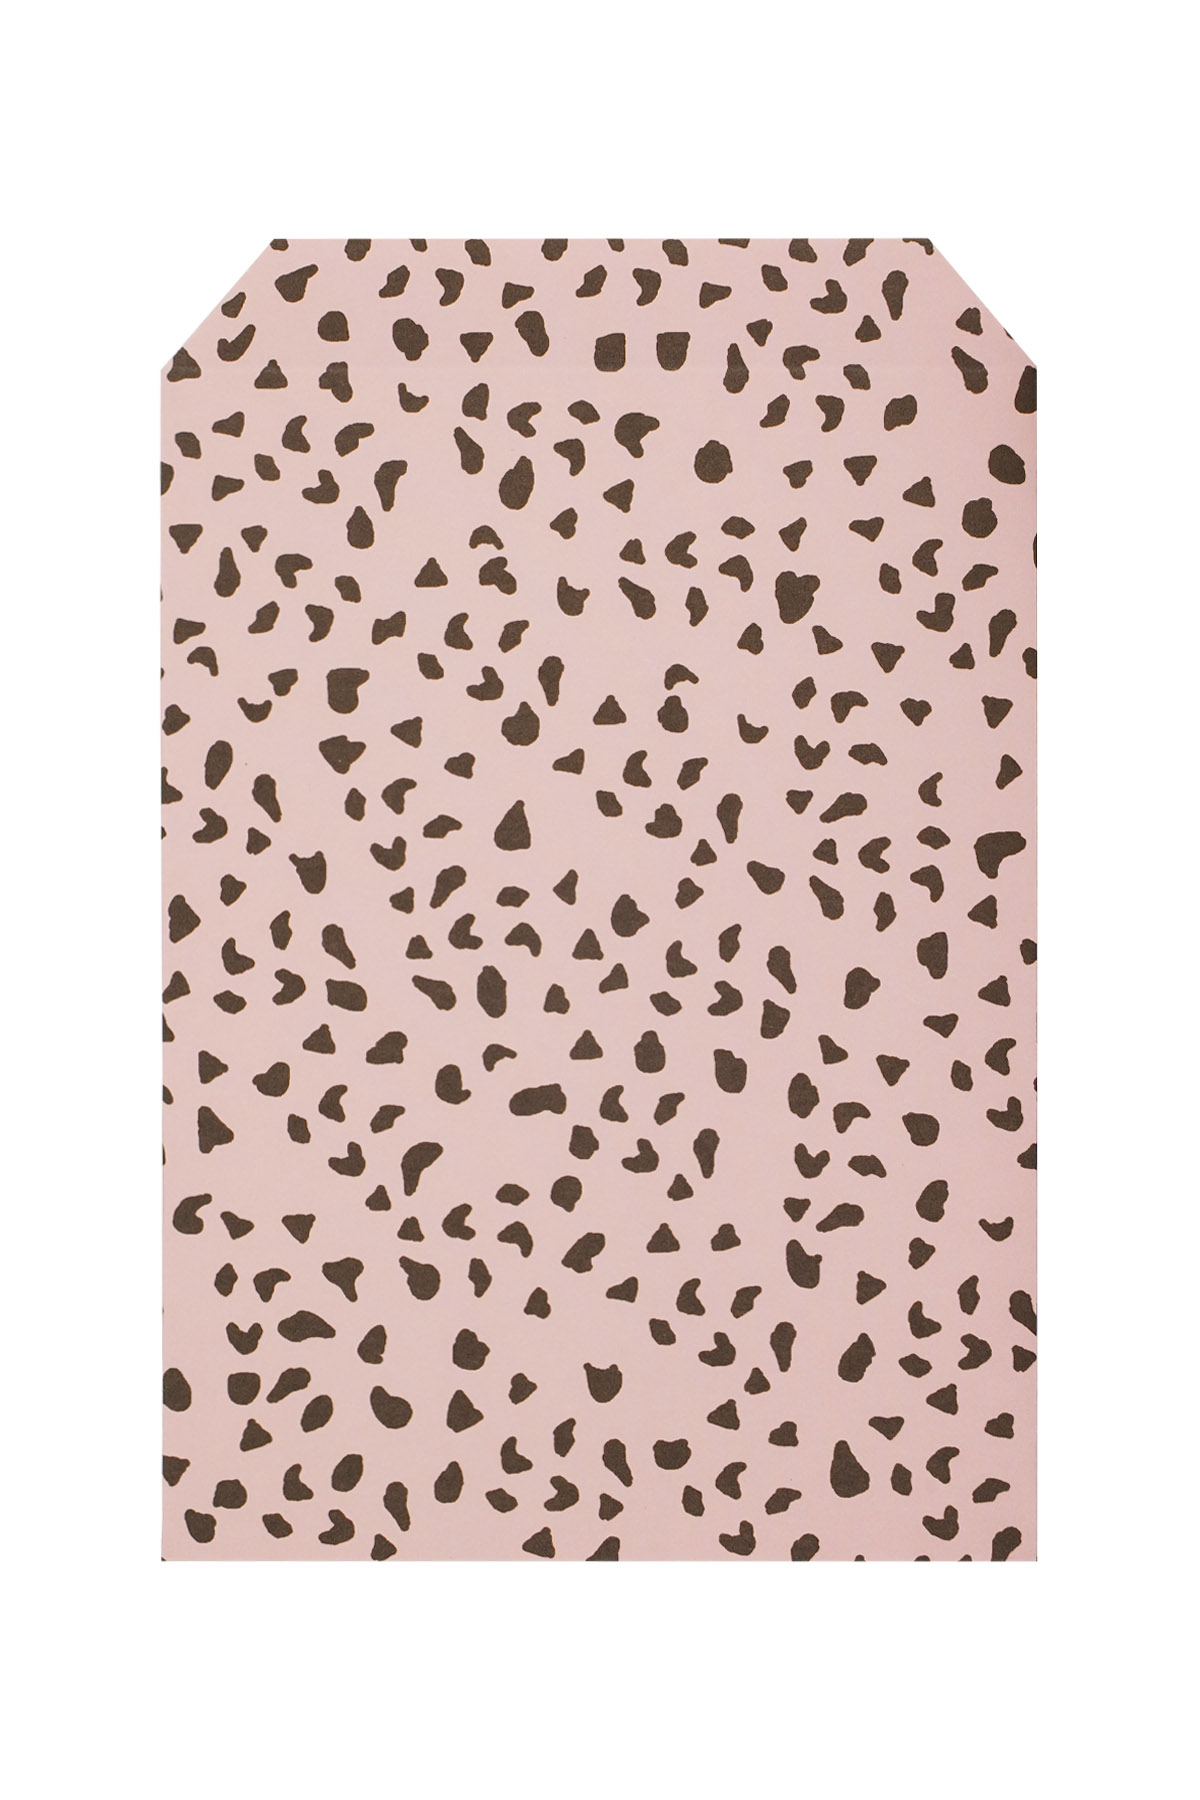 Jewelery envelope with dots pink h5 